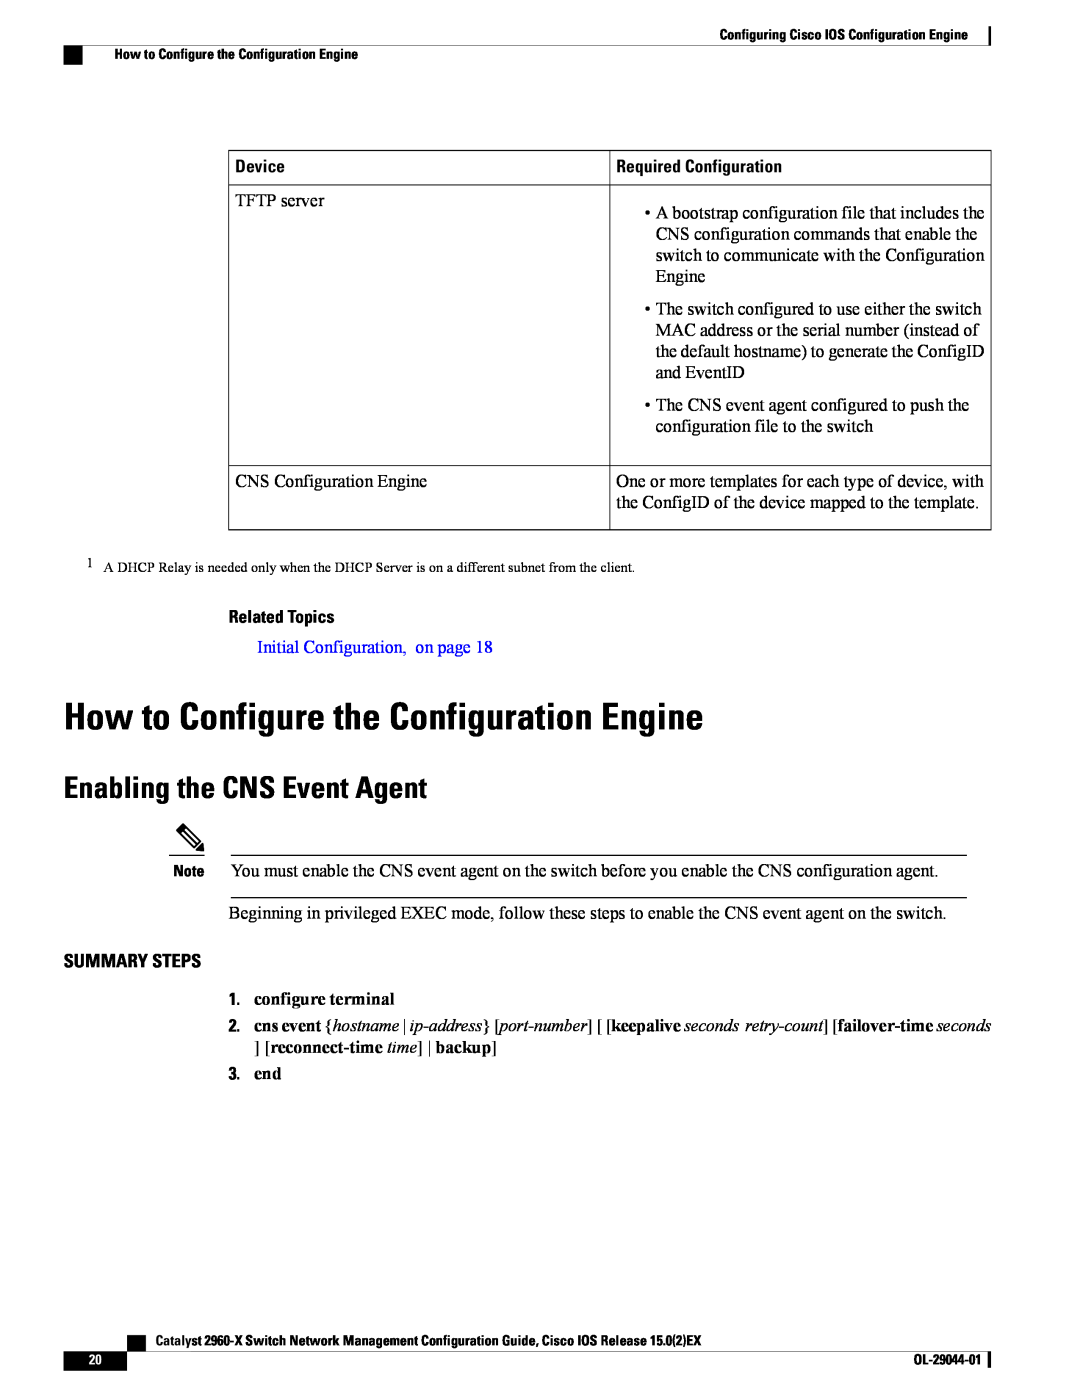 Cisco Systems WSC2960X24PDL How to Configure the Configuration Engine, Enabling the CNS Event Agent, configure terminal 